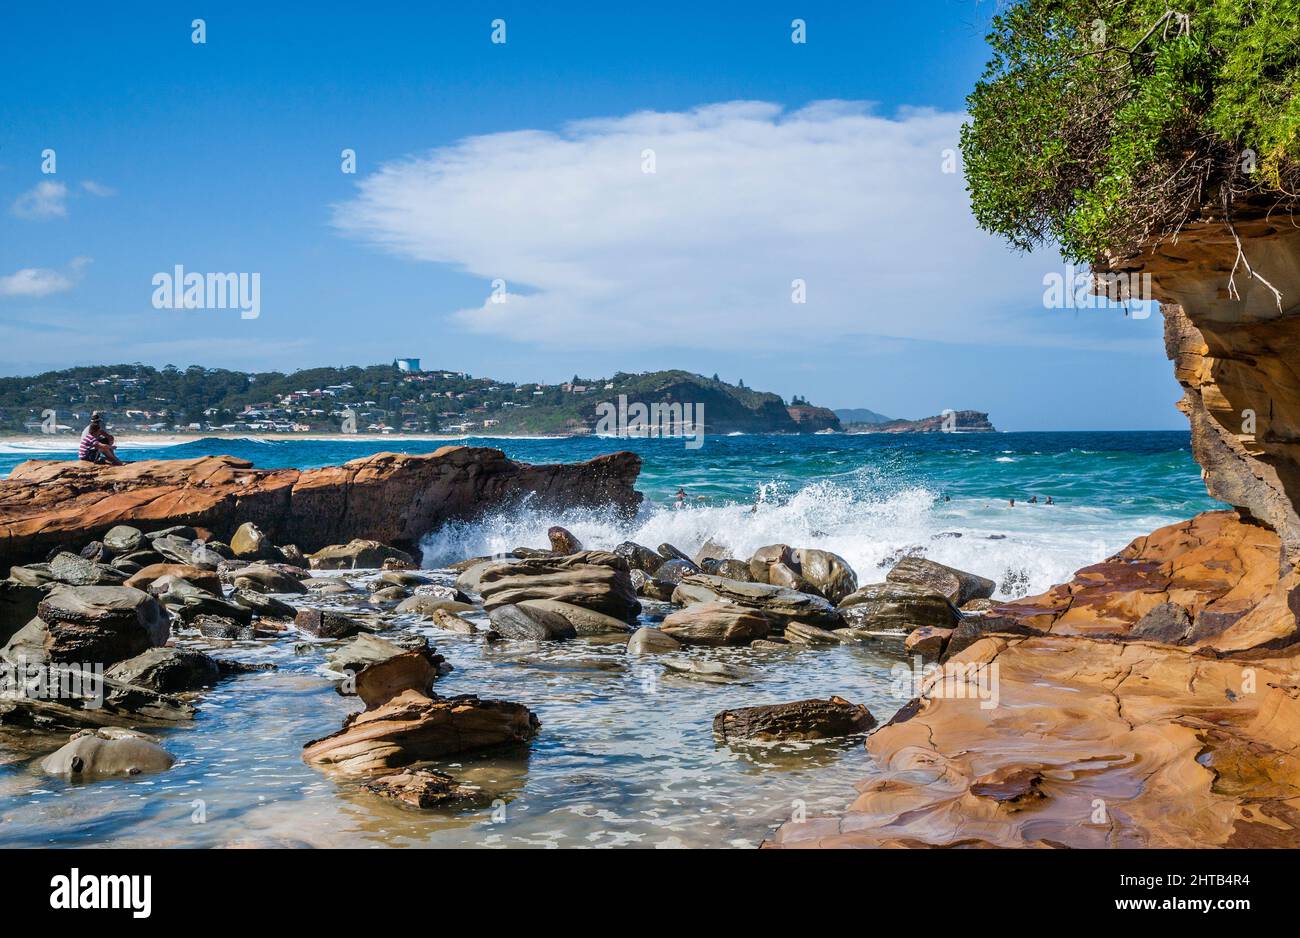 tumultouos surf at Avoca Beach on the Central Coast of New South Wales, Australia Stock Photo